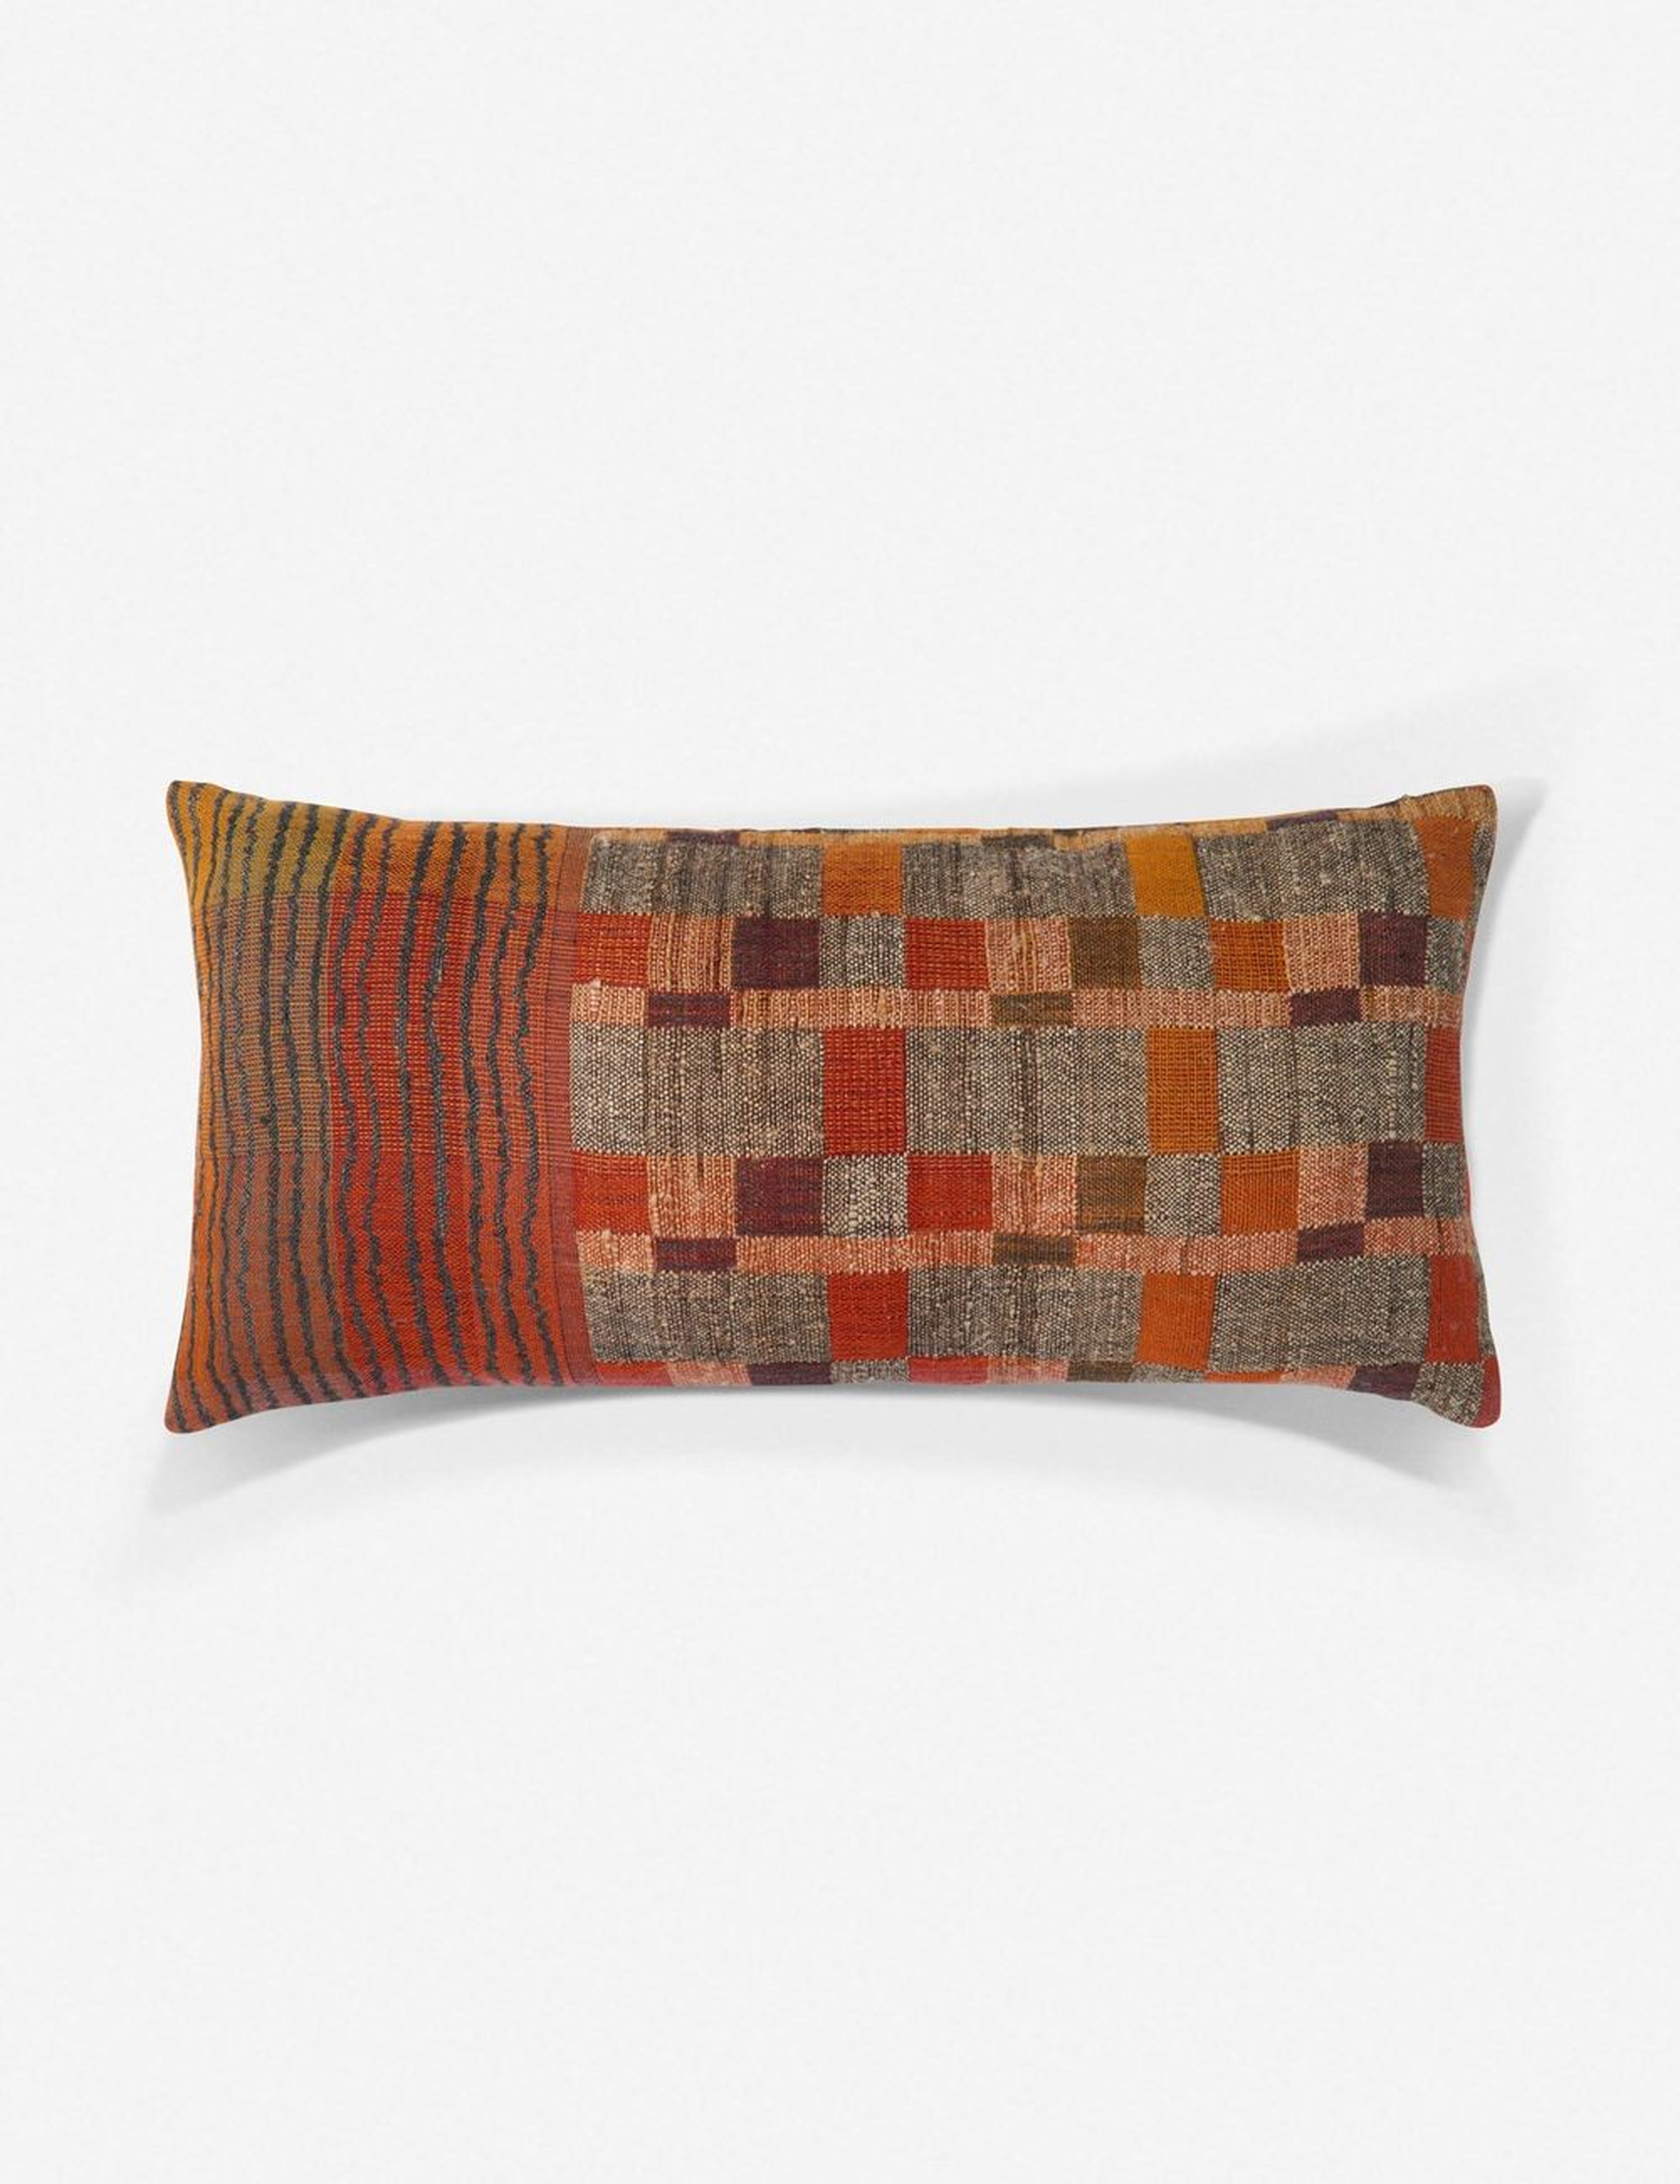 Sienne Lumbar Pillow, Rust and Multi, ED Ellen DeGeneres Crafted by Loloi 27" x 12" - Lulu and Georgia